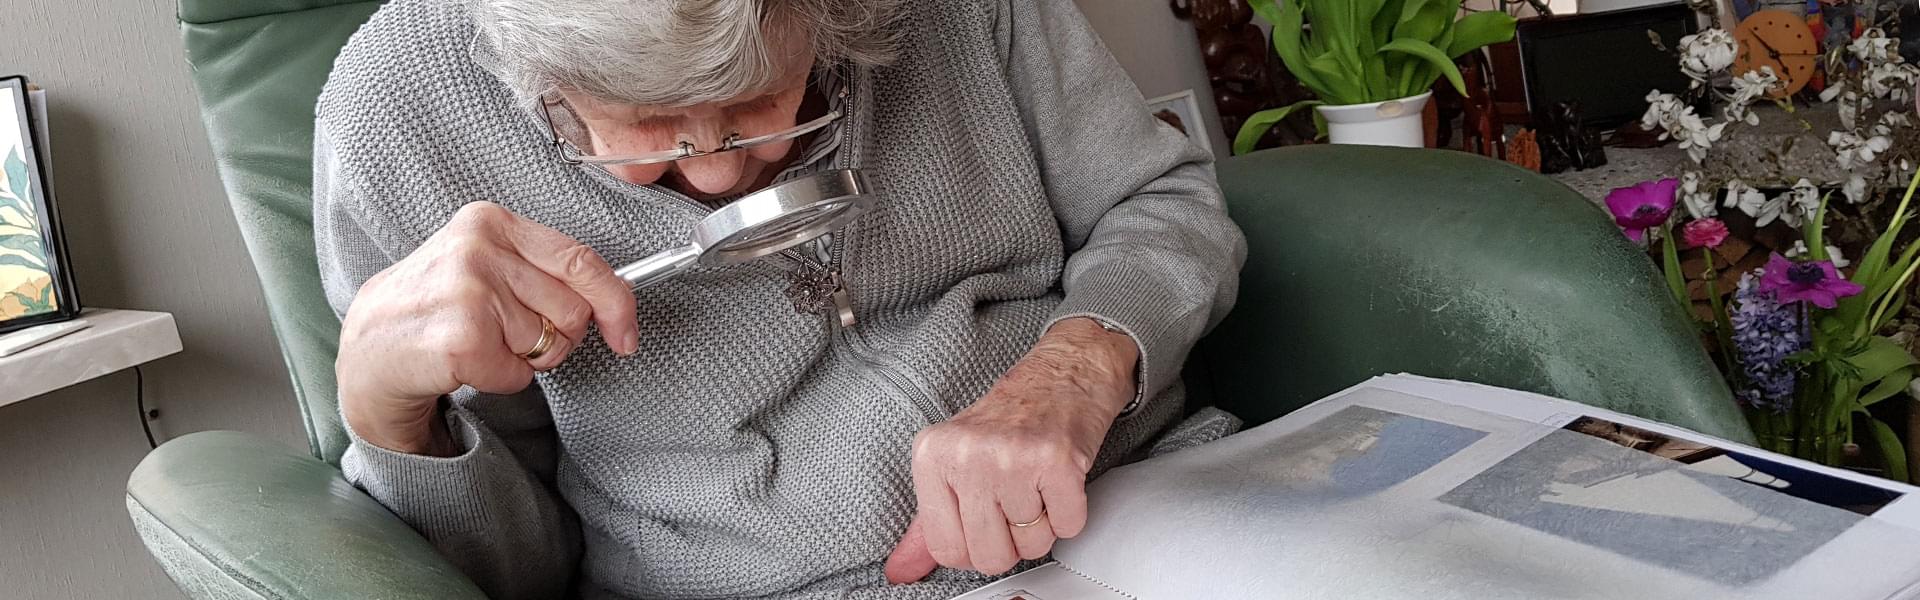 Why is there a social care crisis in the UK?